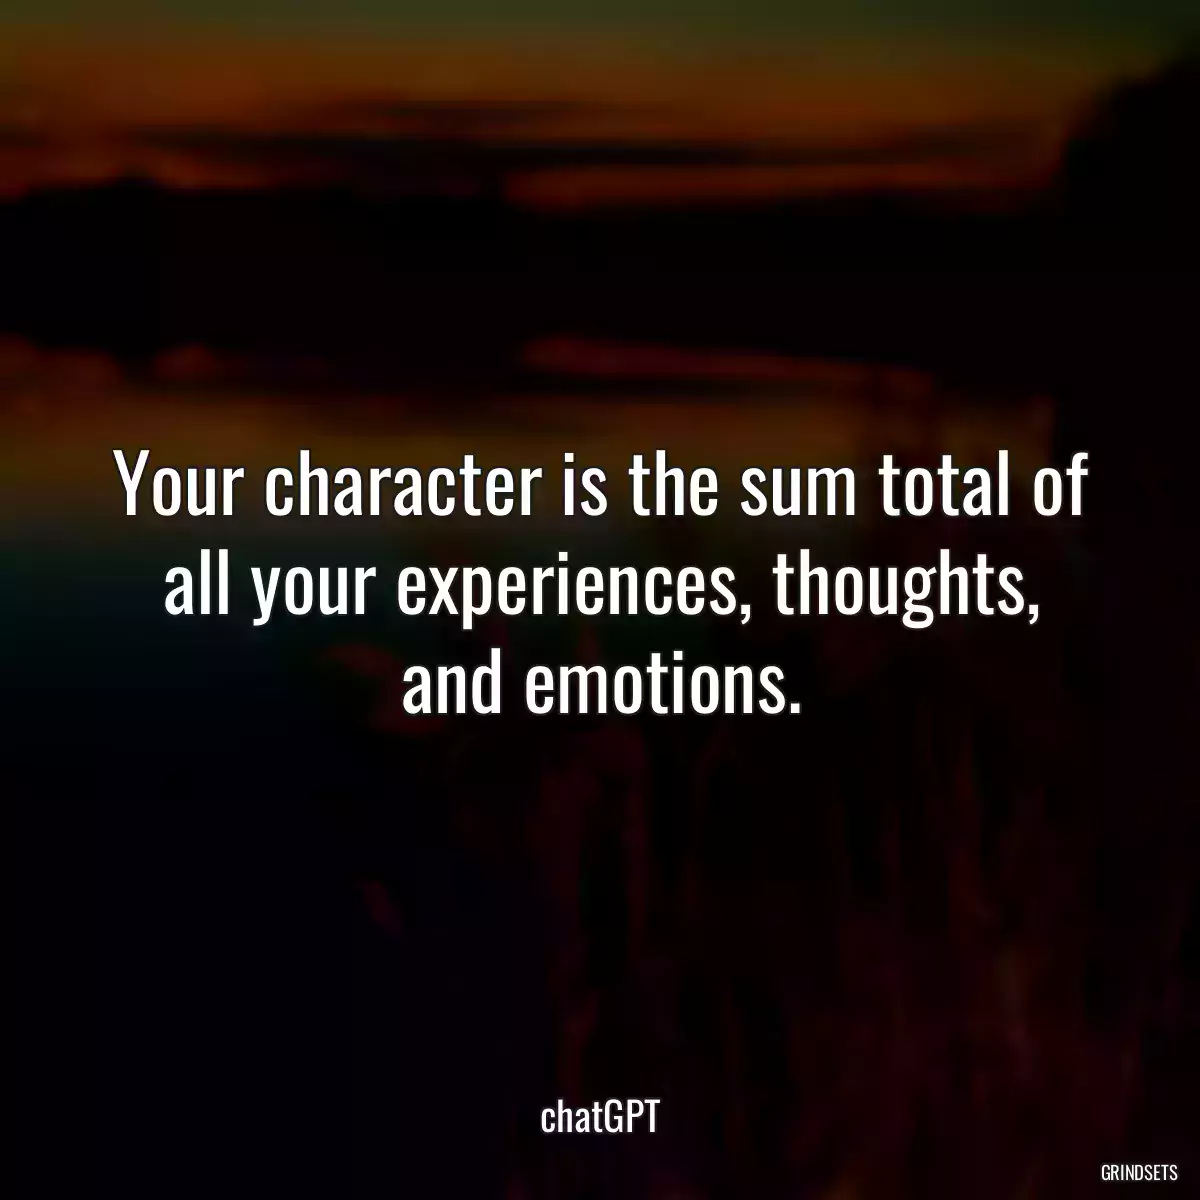 Your character is the sum total of all your experiences, thoughts, and emotions.